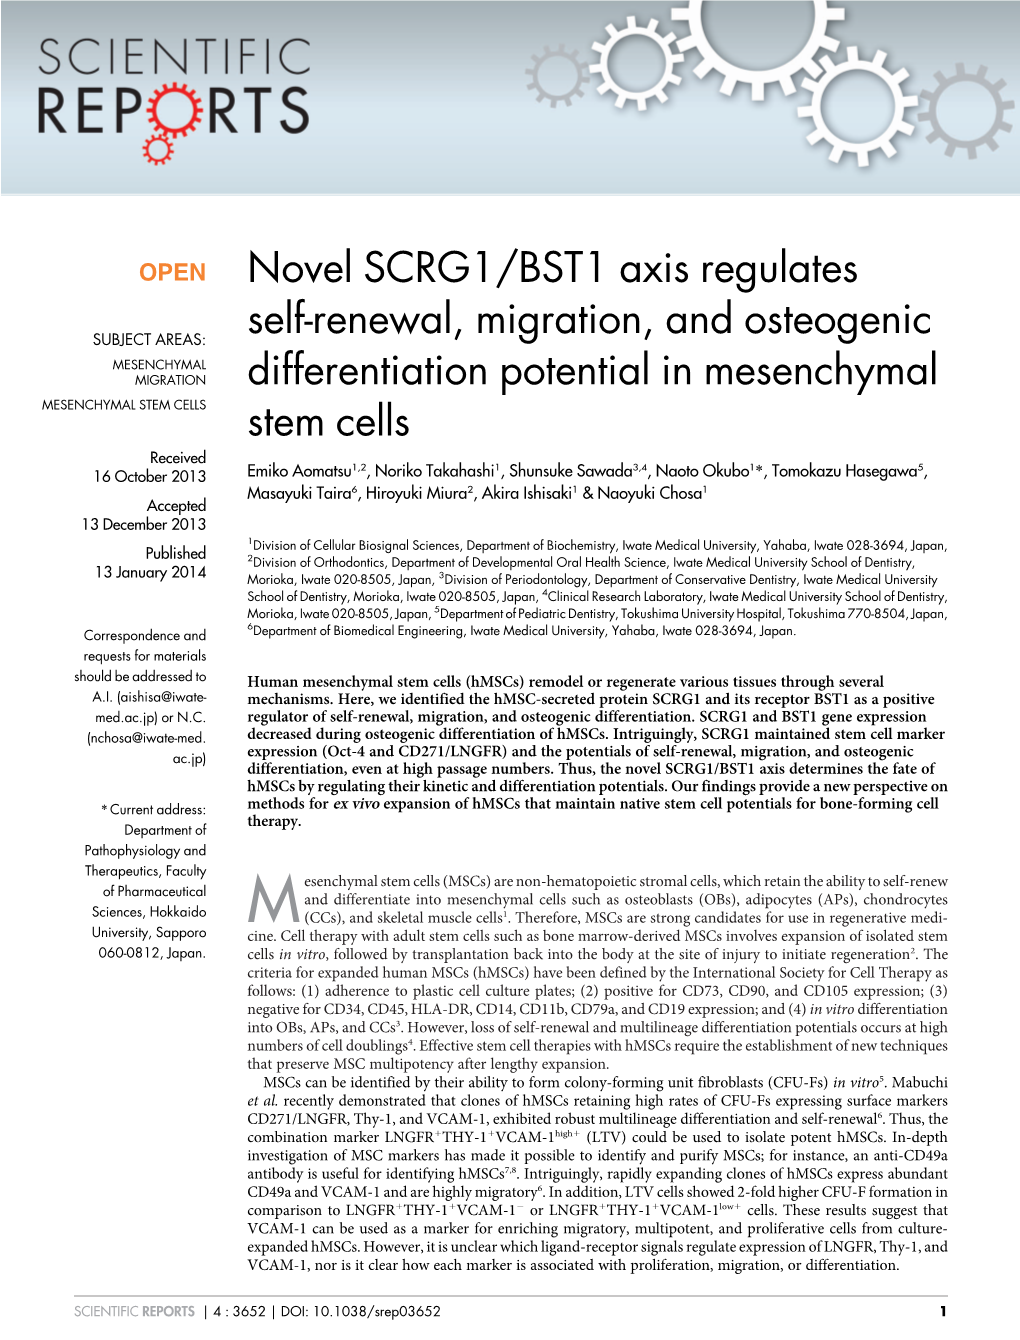 Novel SCRG1/BST1 Axis Regulates Self-Renewal, Migration, and Osteogenic Differentiation Potential in Mesenchymal Stem Cells